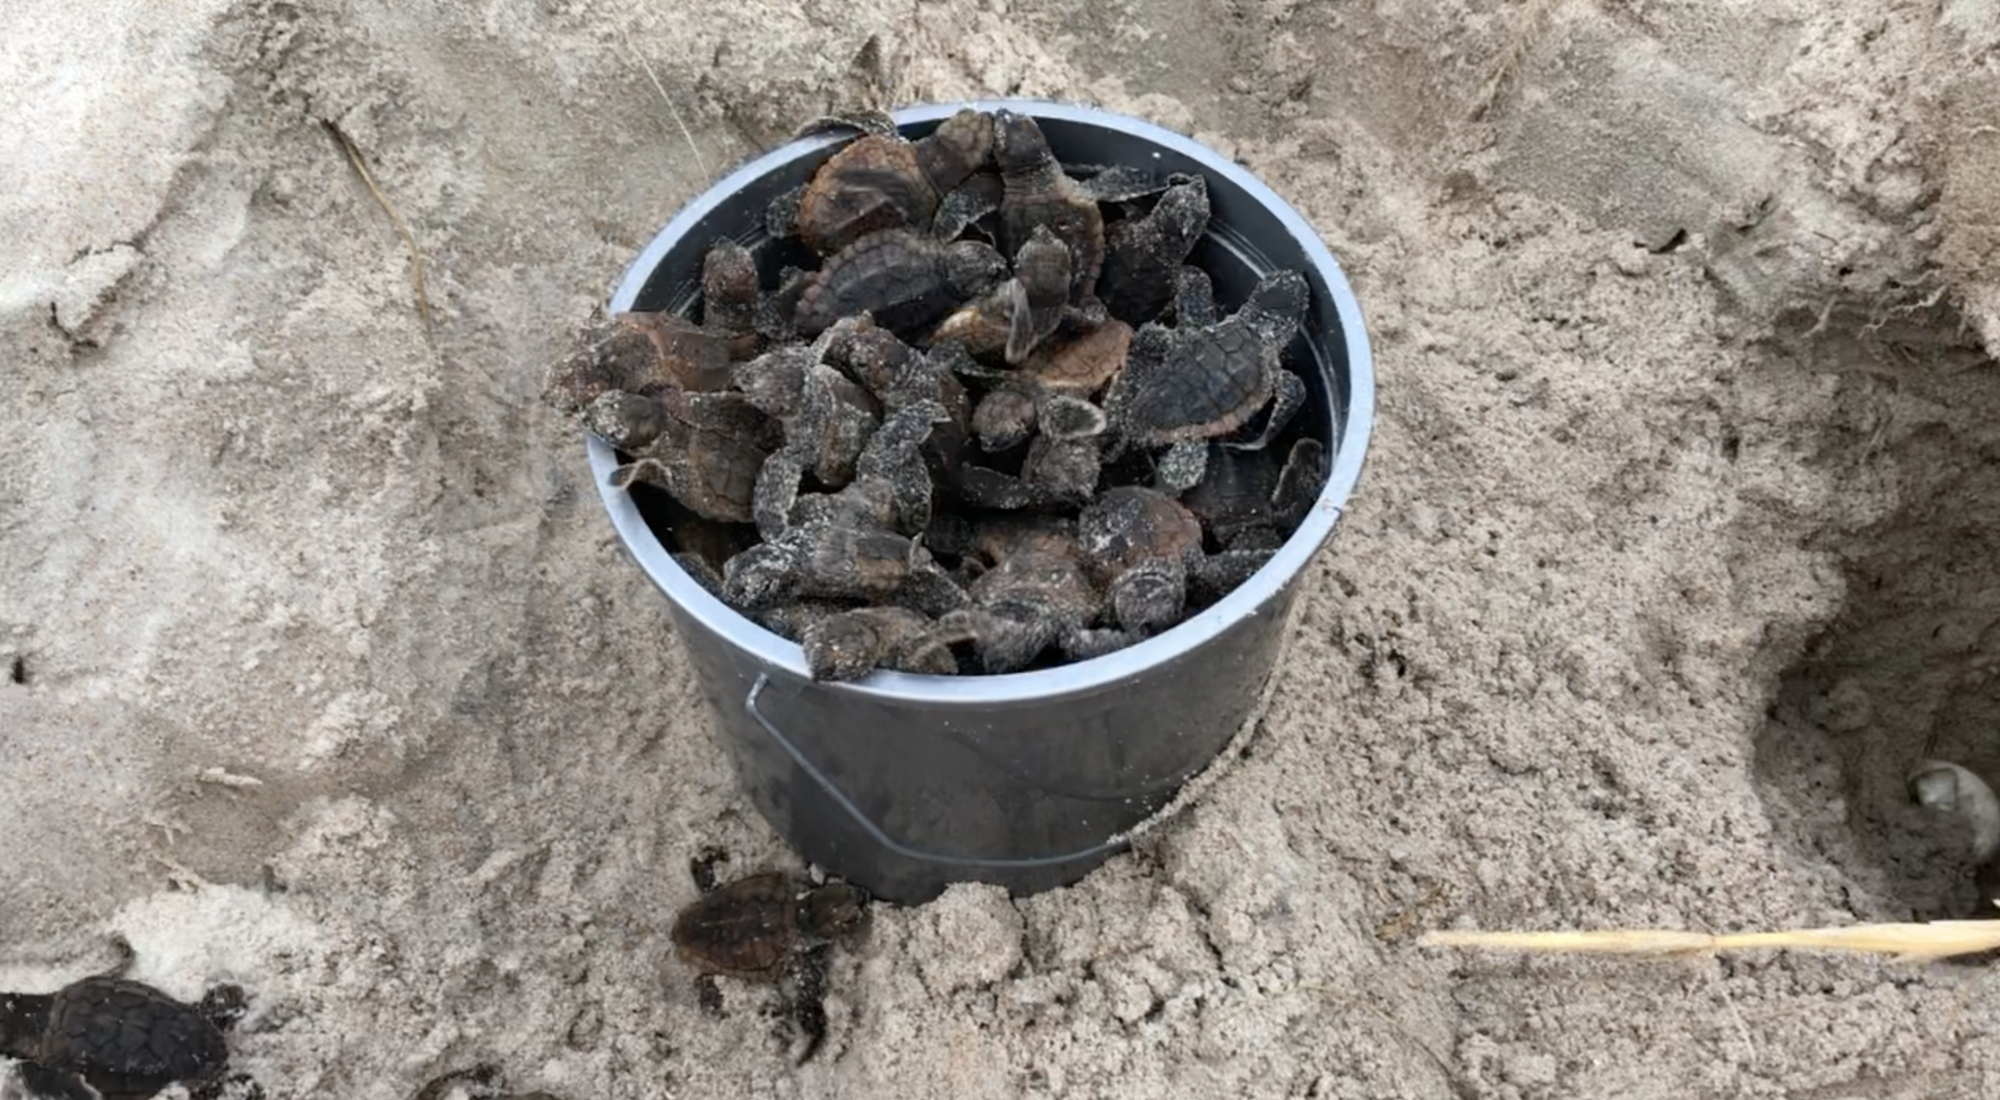 This year, Deena Delany discovered 84 live hatchlings in a nest that had been covered with railroad vine. Screenshot of video, courtesy of Deena Delaney